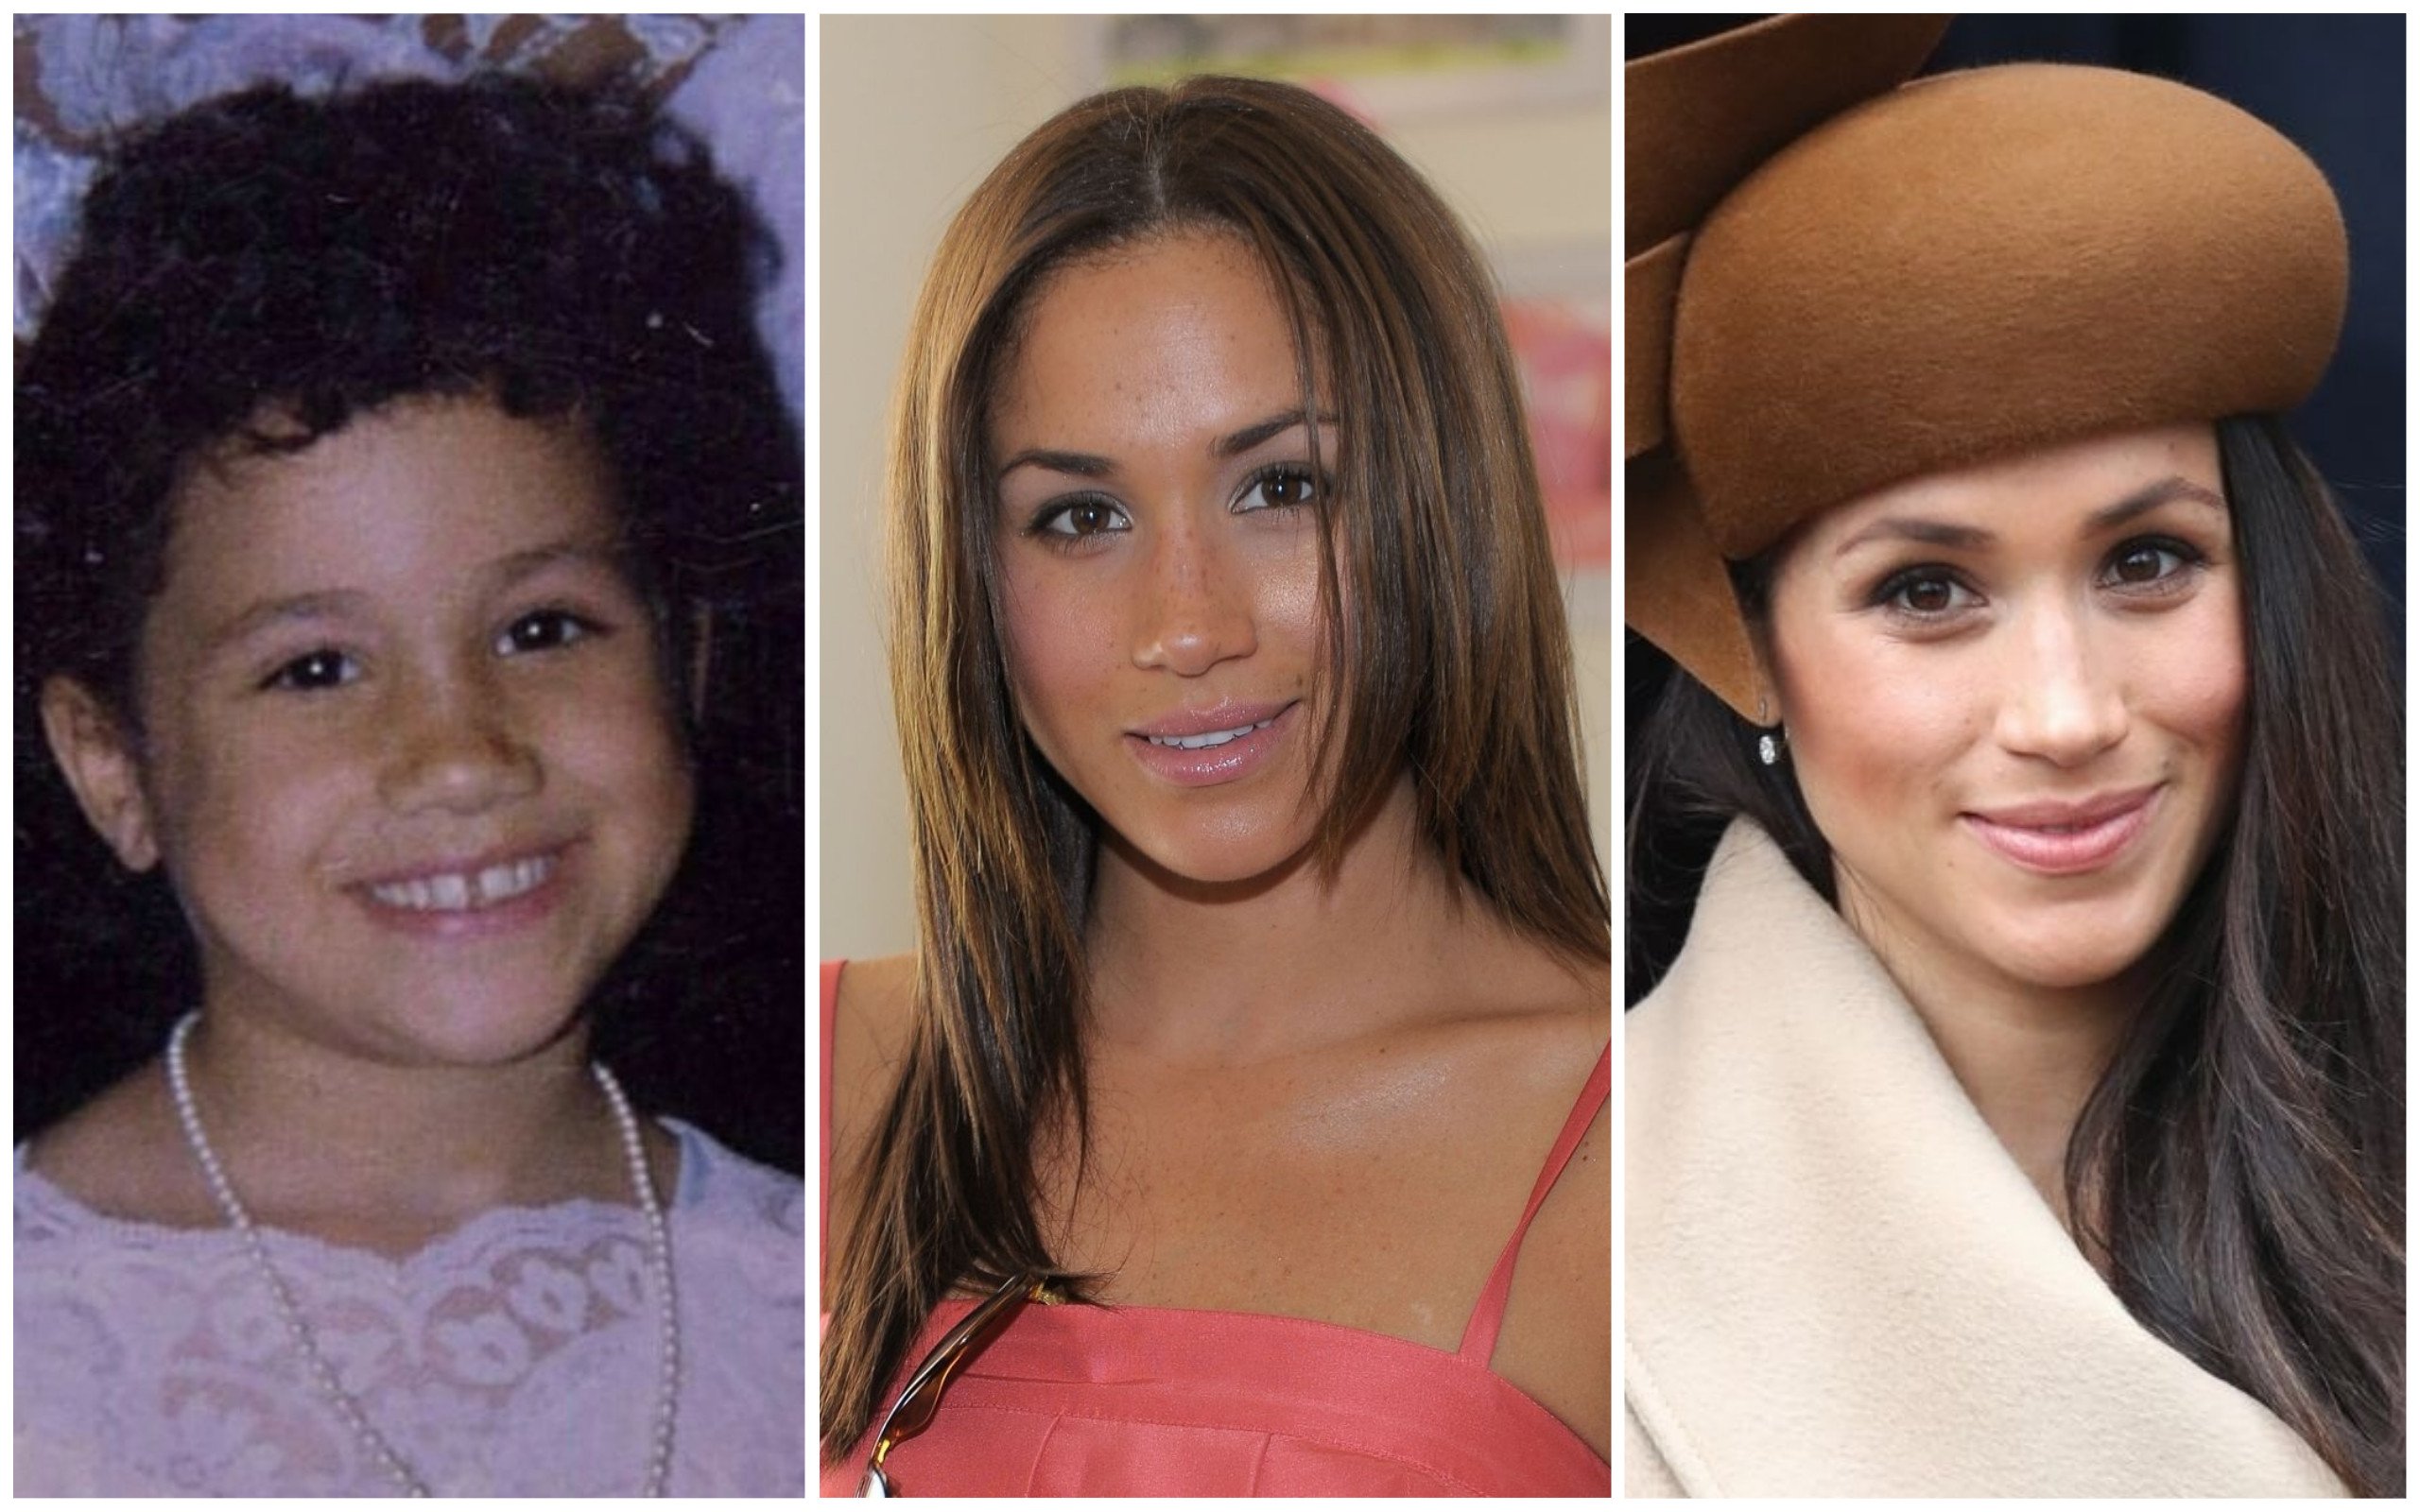 Meghan Markle’s looks, from child to actress then Duchess. Photo: Buro 247 NY